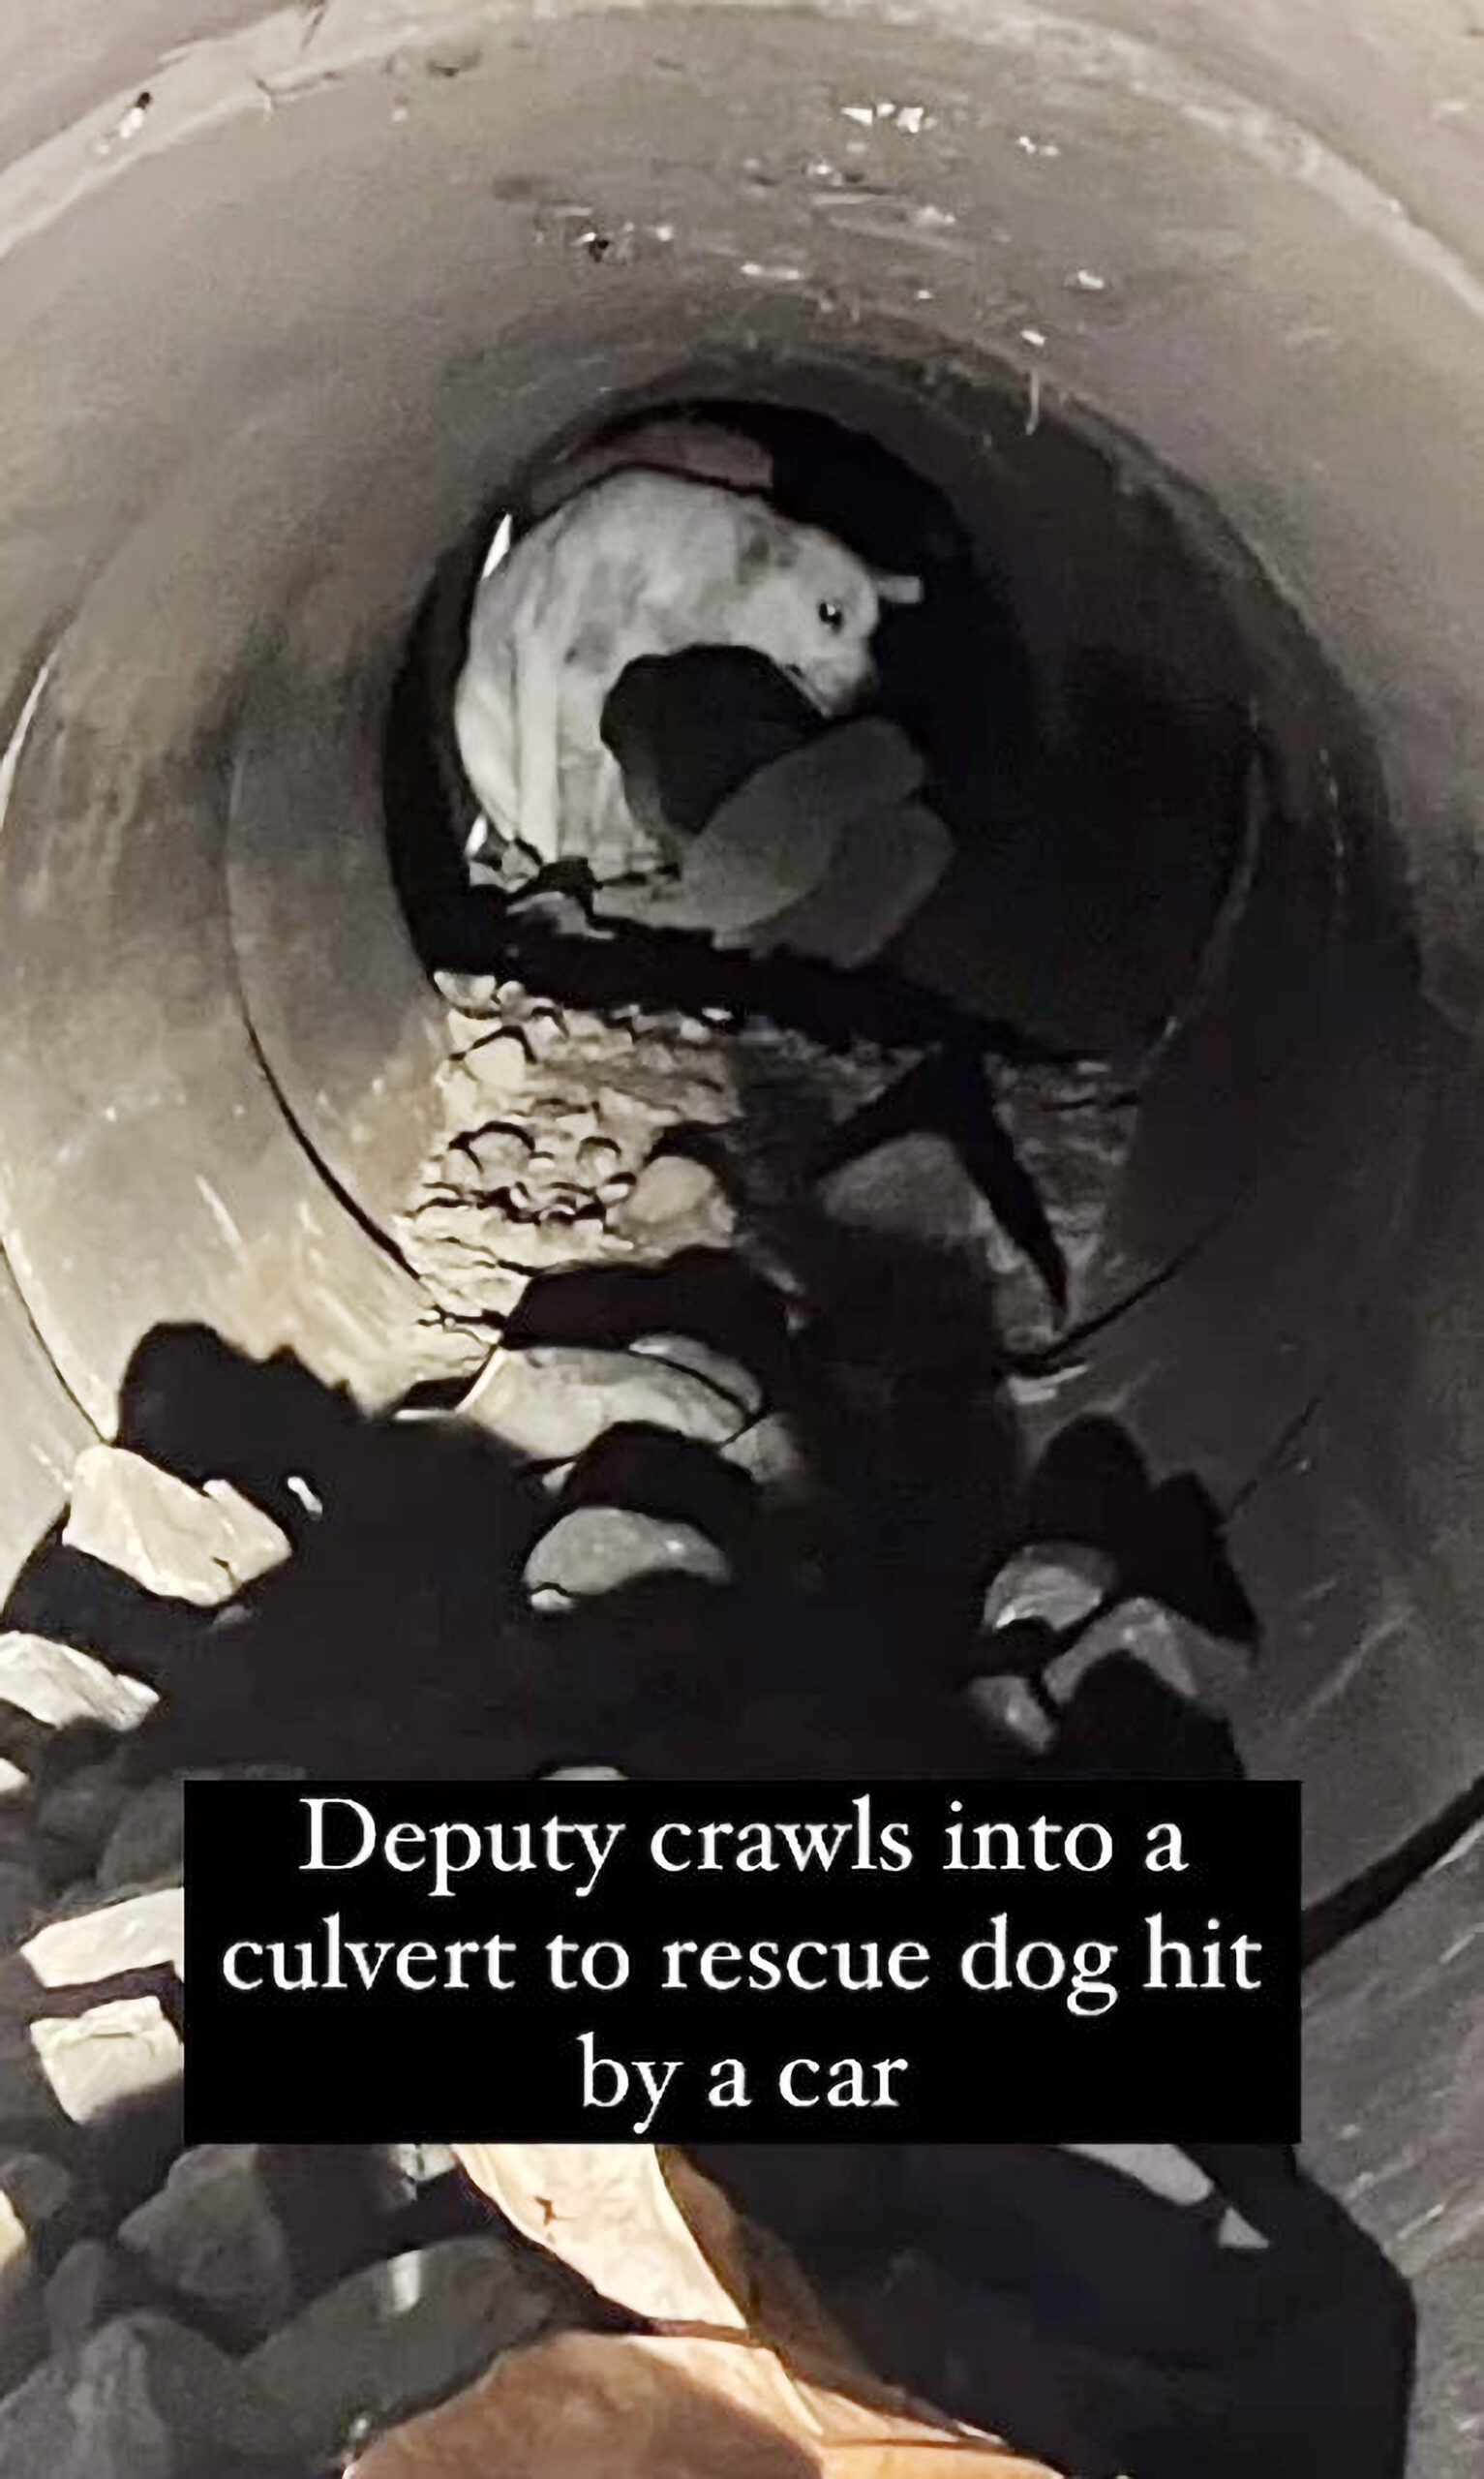 Deputy Crawls Into Pipe To Rescue Injured Dog